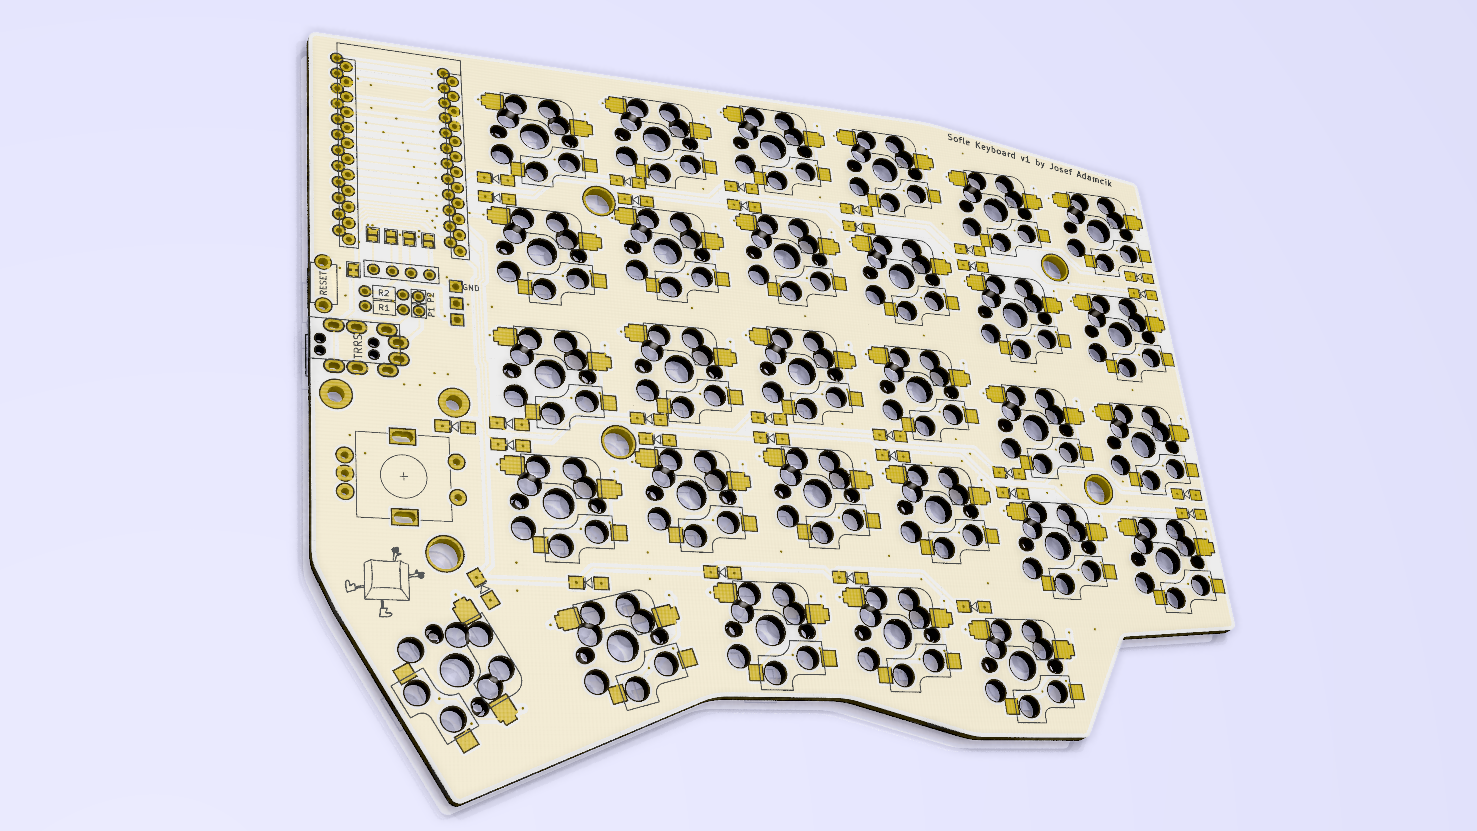 3D render of the PCB